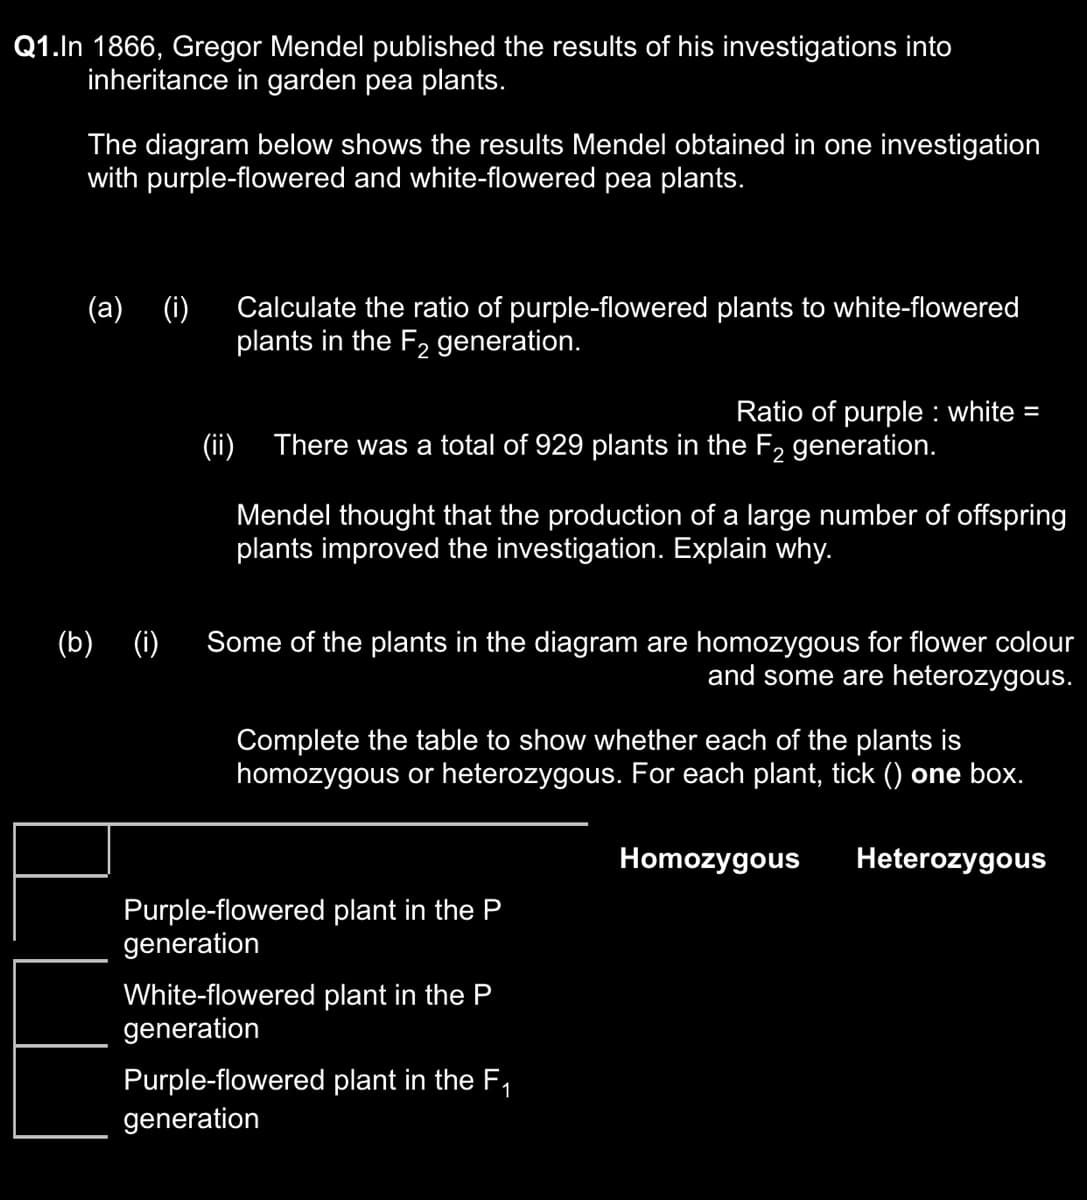 Q1.In 1866, Gregor Mendel published the results of his investigations into
inheritance in garden pea plants.
The diagram below shows the results Mendel obtained in one investigation
with purple-flowered and white-flowered pea plants.
(a) (i)
Calculate the ratio of purple-flowered plants to white-flowered
plants in the F2 generation.
Ratio of purple : white
(ii) There was a total of 929 plants in the F2 generation.
Mendel thought that the production of a large number of offspring
plants improved the investigation. Explain why.
(b) (i) Some of the plants in the diagram are homozygous for flower colour
and some are heterozygous.
Complete the table to show whether each of the plants is
homozygous or heterozygous. For each plant, tick () one box.
Homozygous
Heterozygous
Purple-flowered plant in the P
generation
White-flowered plant in the P
generation
Purple-flowered plant in the F,
generation
